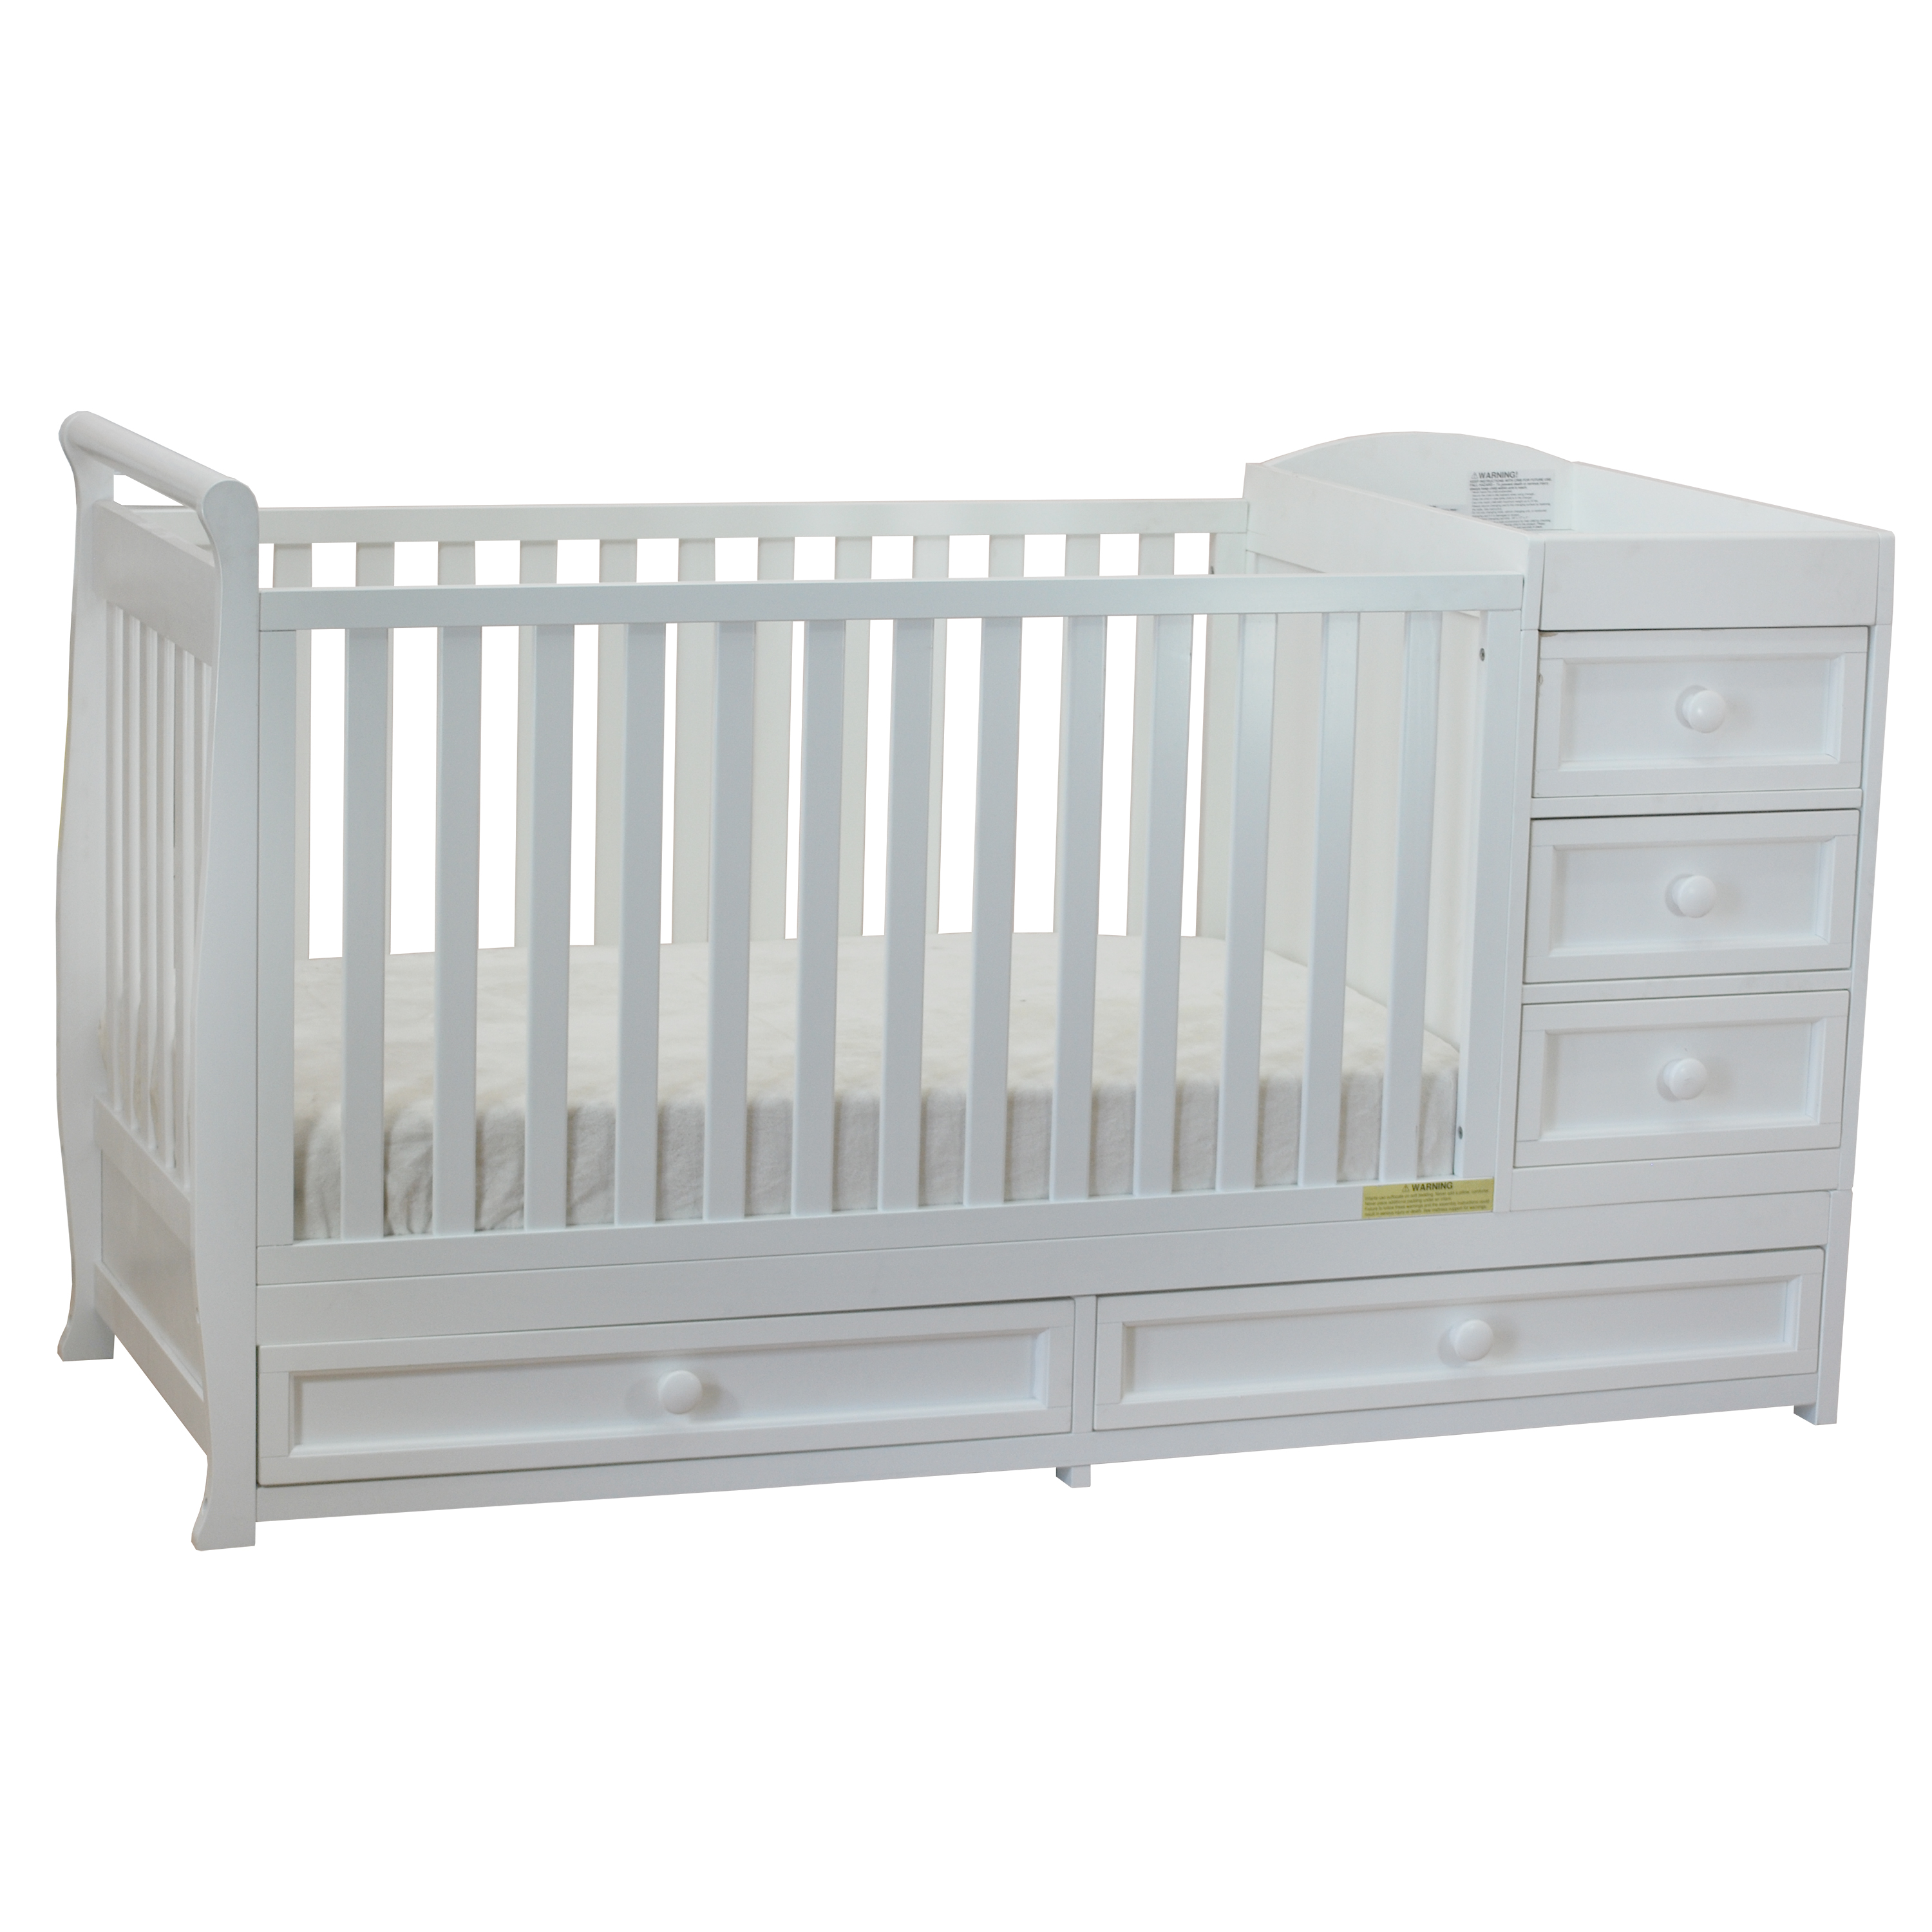 AFG Baby Furniture Daphne 2-in-1 Convertible Crib and Changer White - image 4 of 6